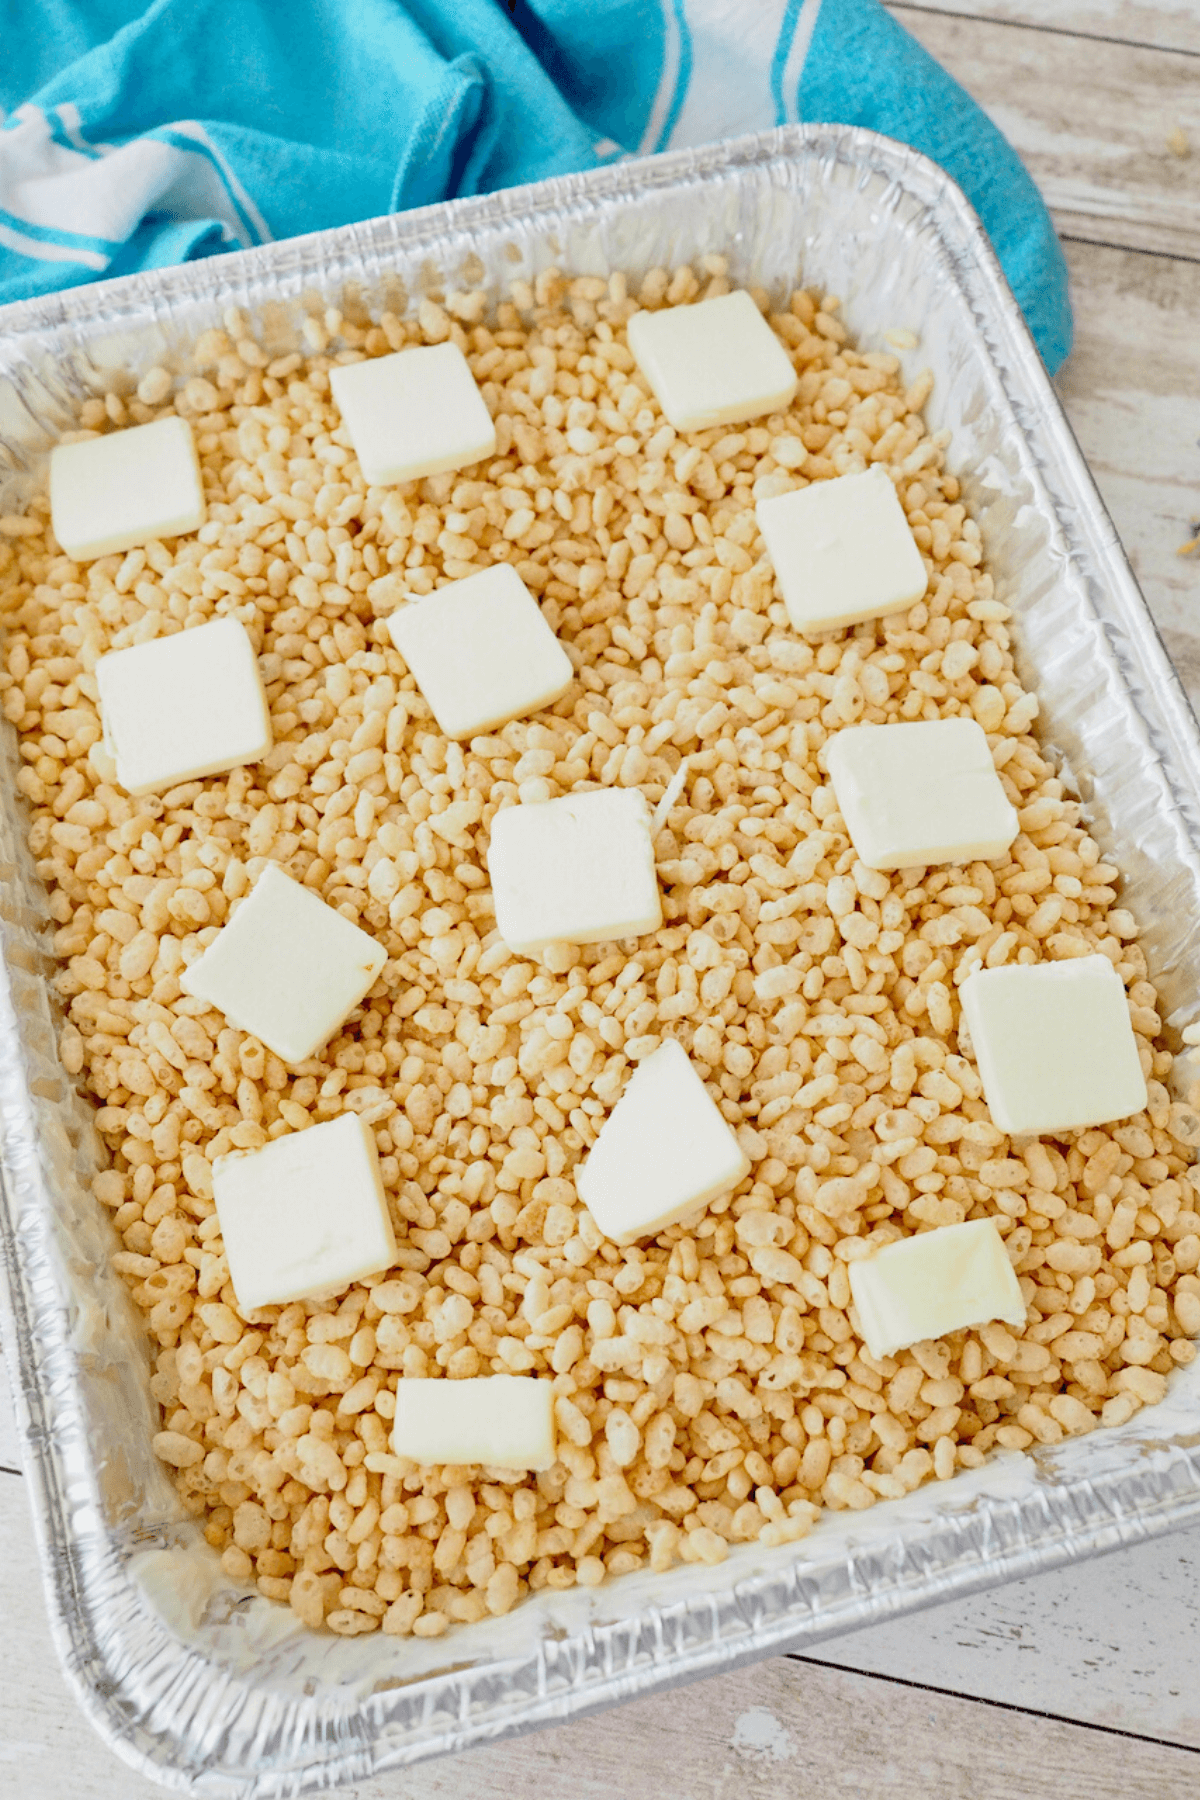 Pats of butter on top of rice krispies.